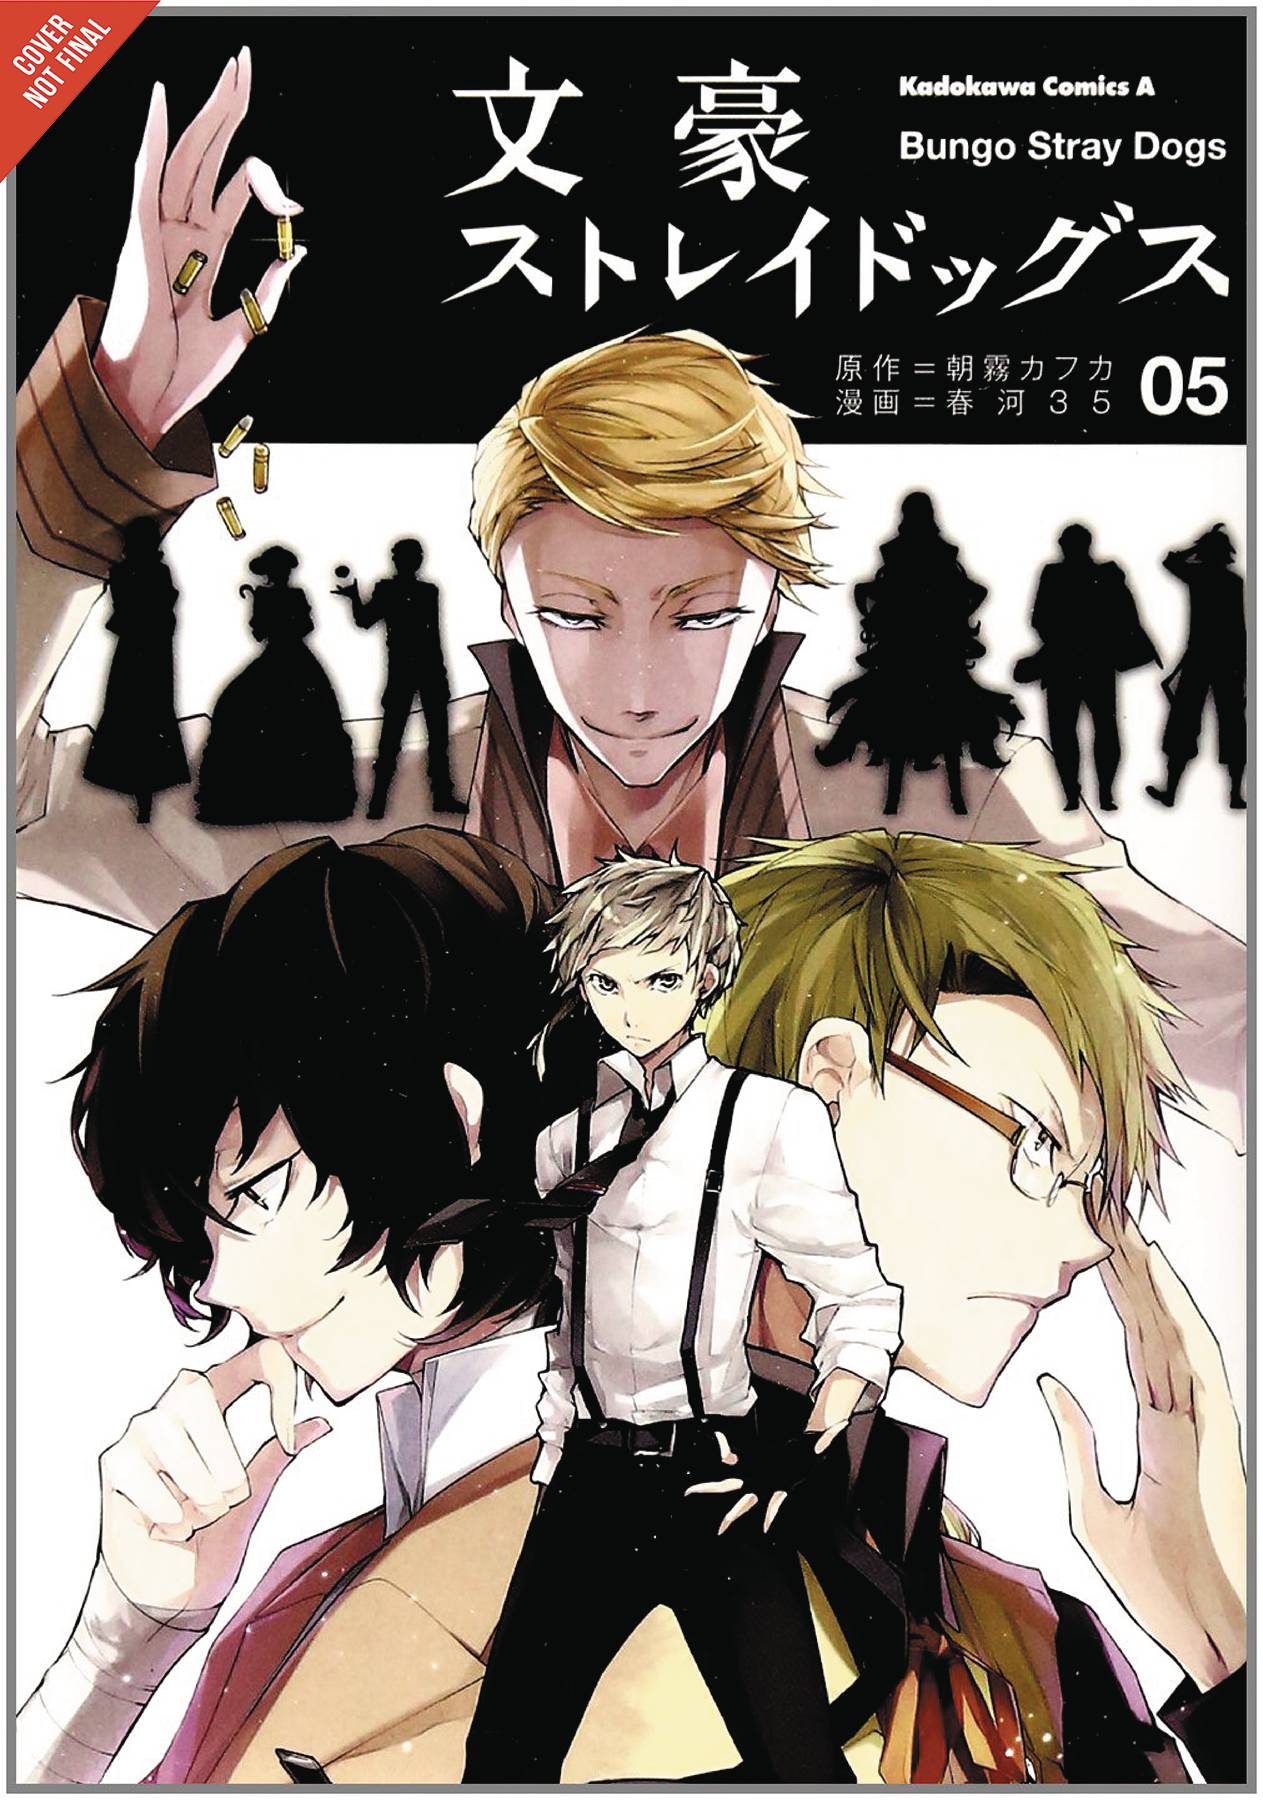 BUNGO STRAY DOGS GN VOL 05